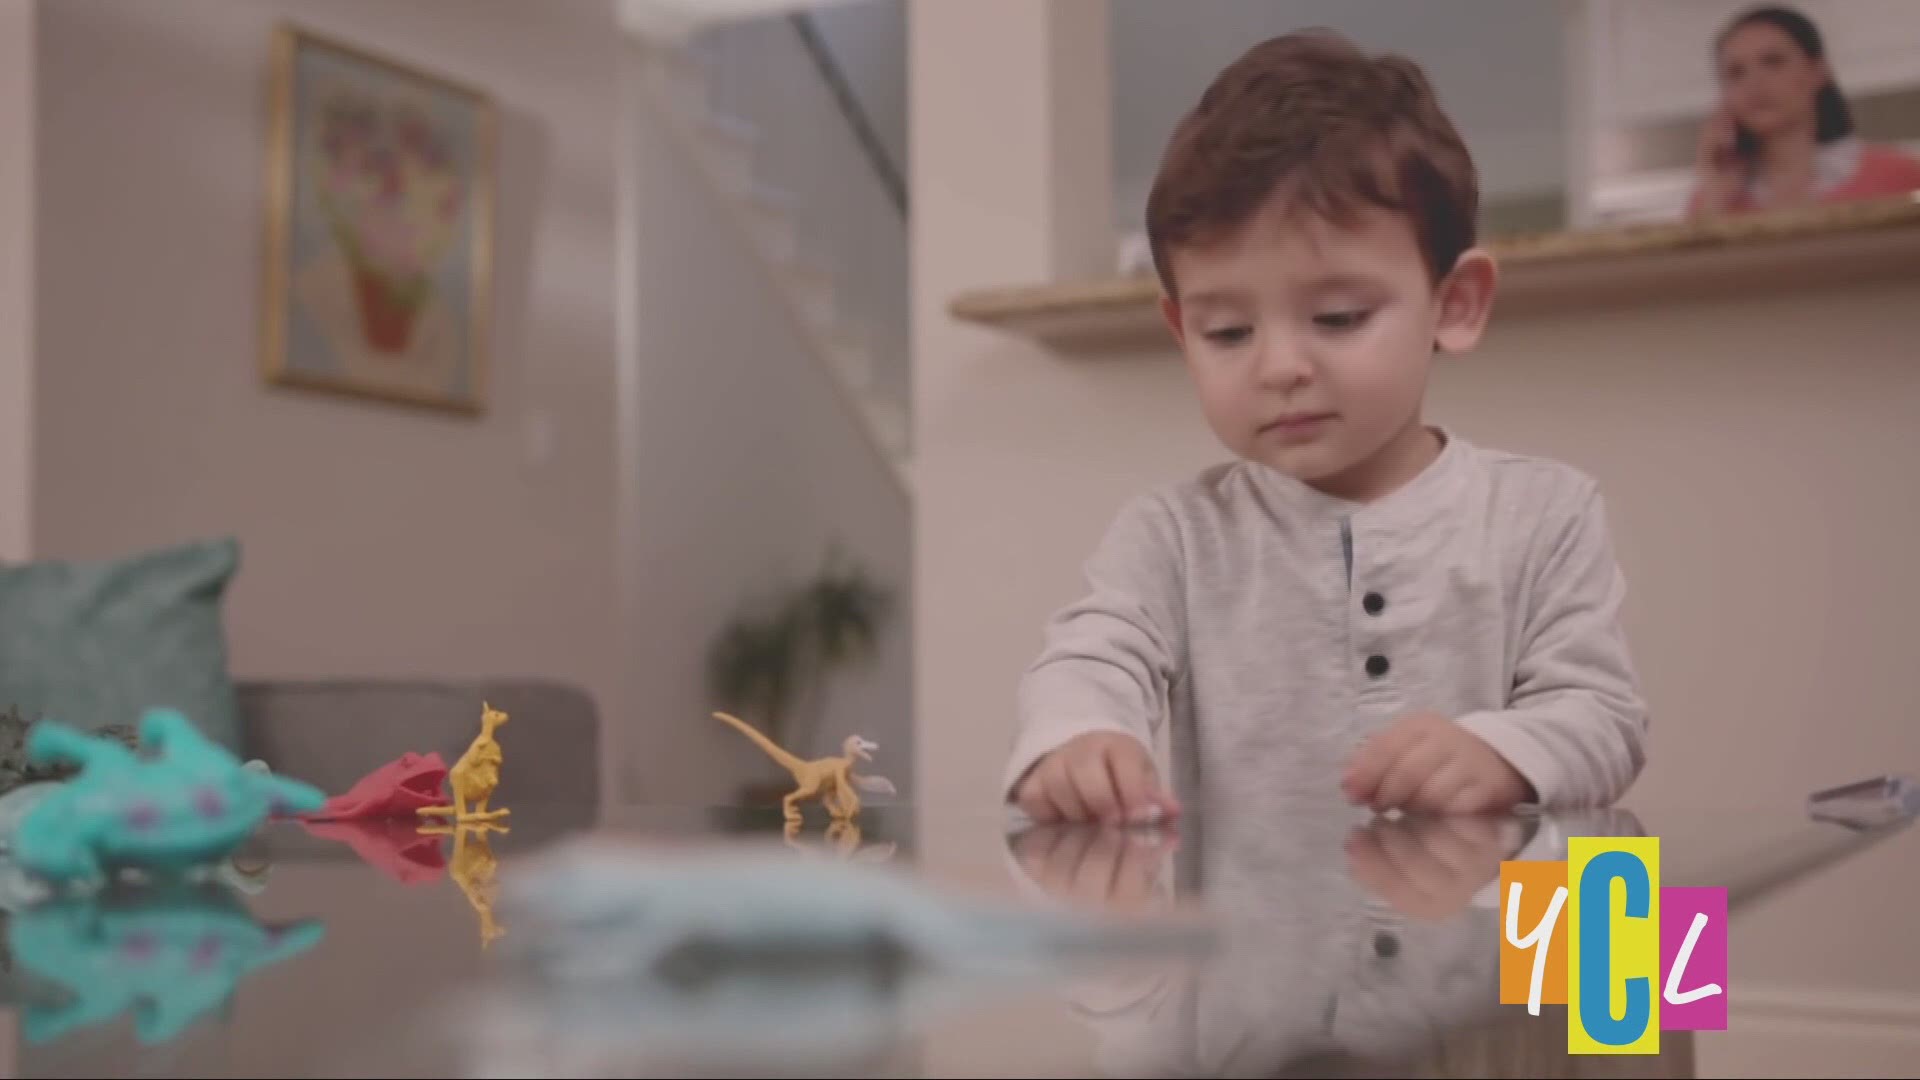 Hundreds of lithium coin batteries are accidentally ingested each year by kids, so Duracell is innovating battery safety features. This segment paid for by Duracell.